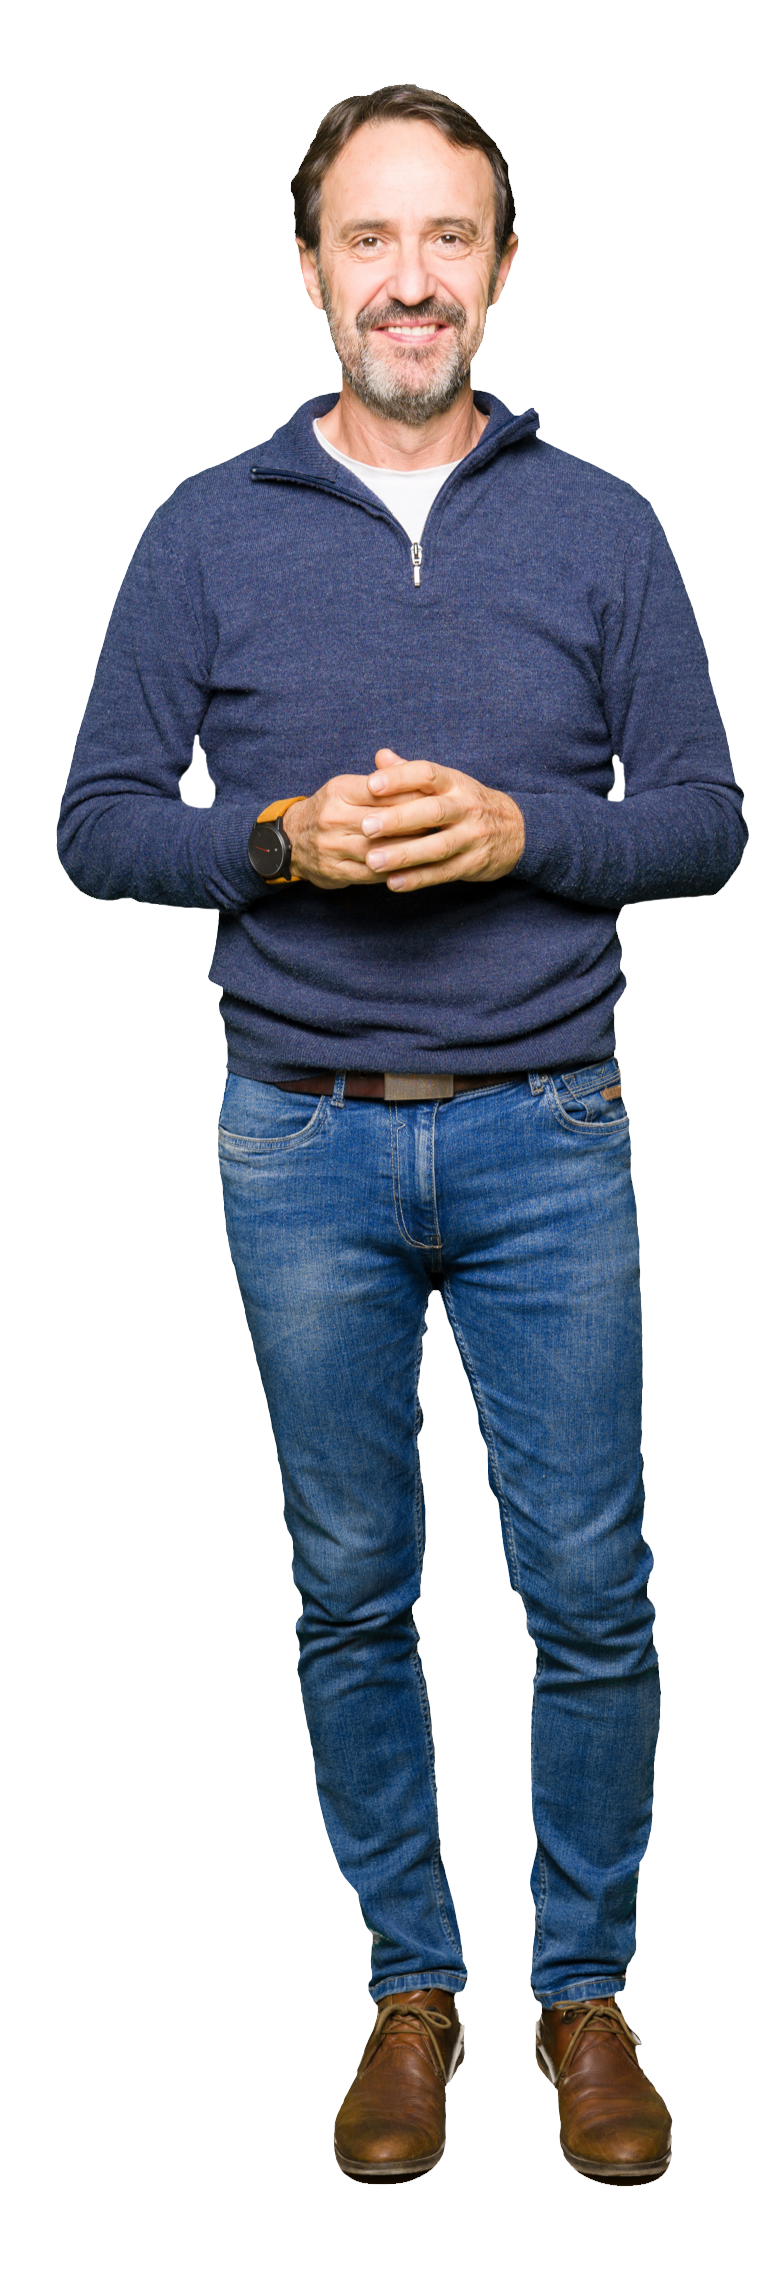 photo of pensive-looking man with hands in pockets